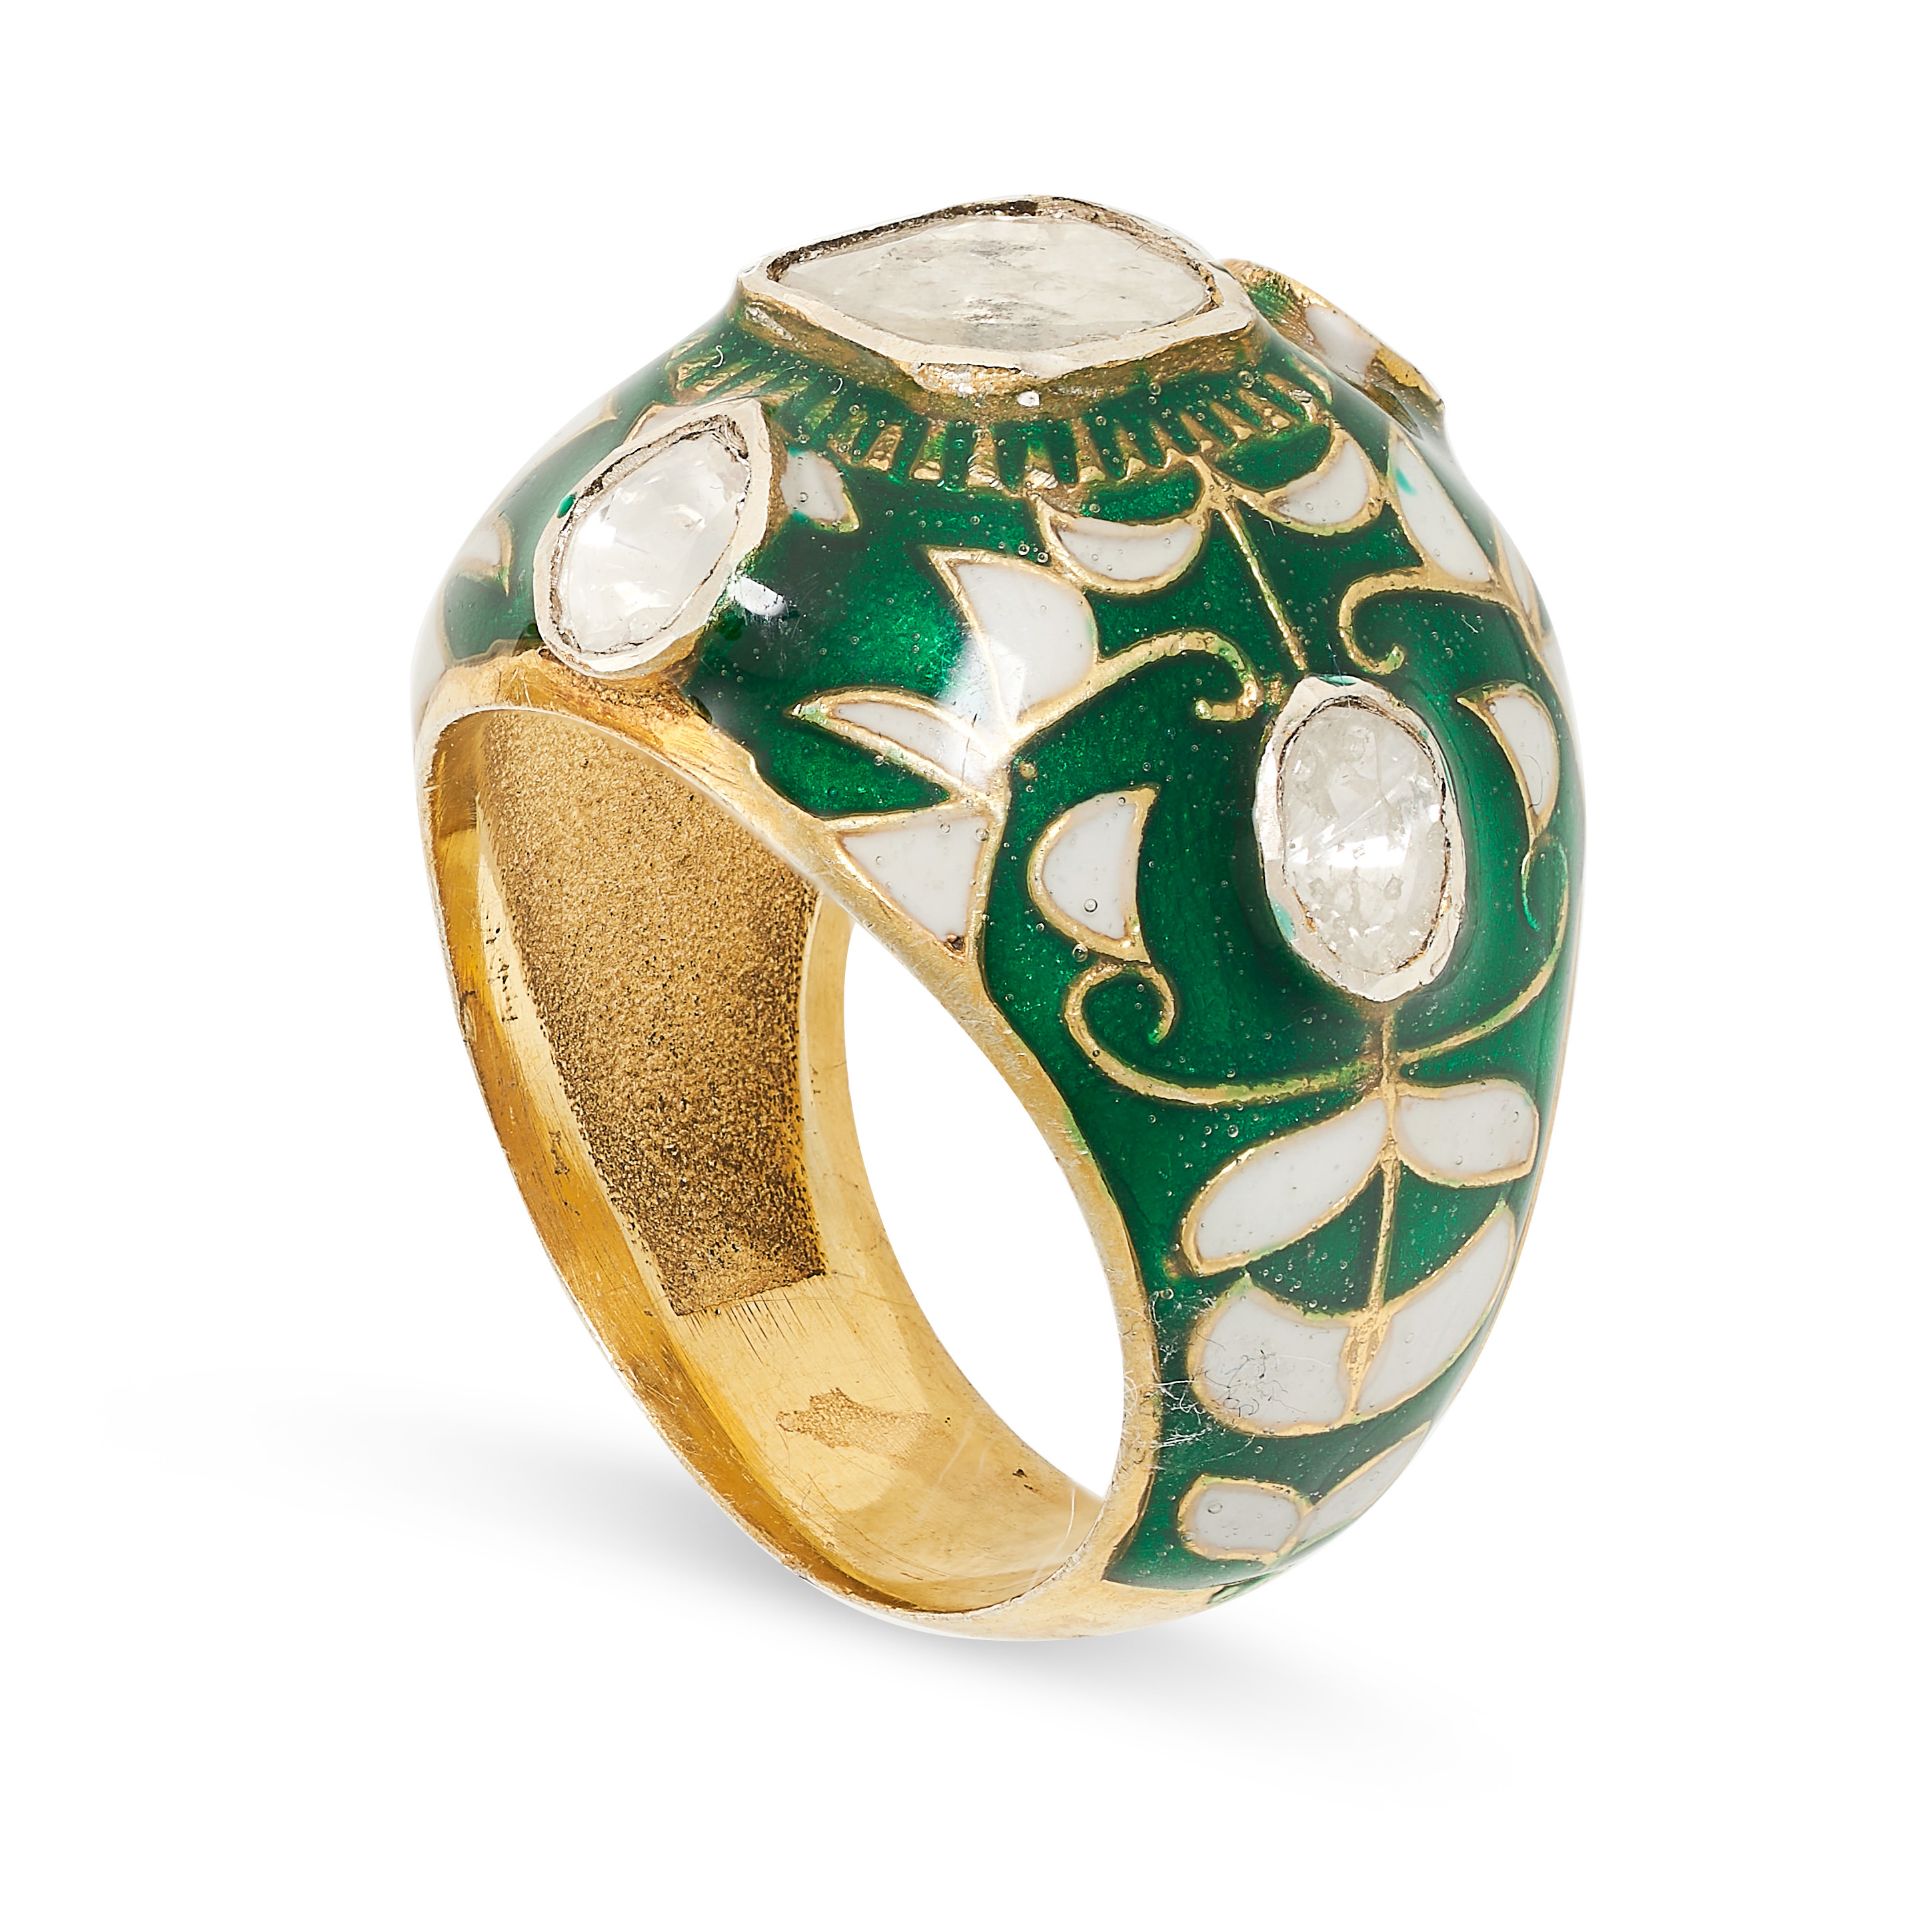 A DIAMOND AND ENAMEL RING set with a flat cut diamond in a border of green and white enamel, - Image 2 of 2